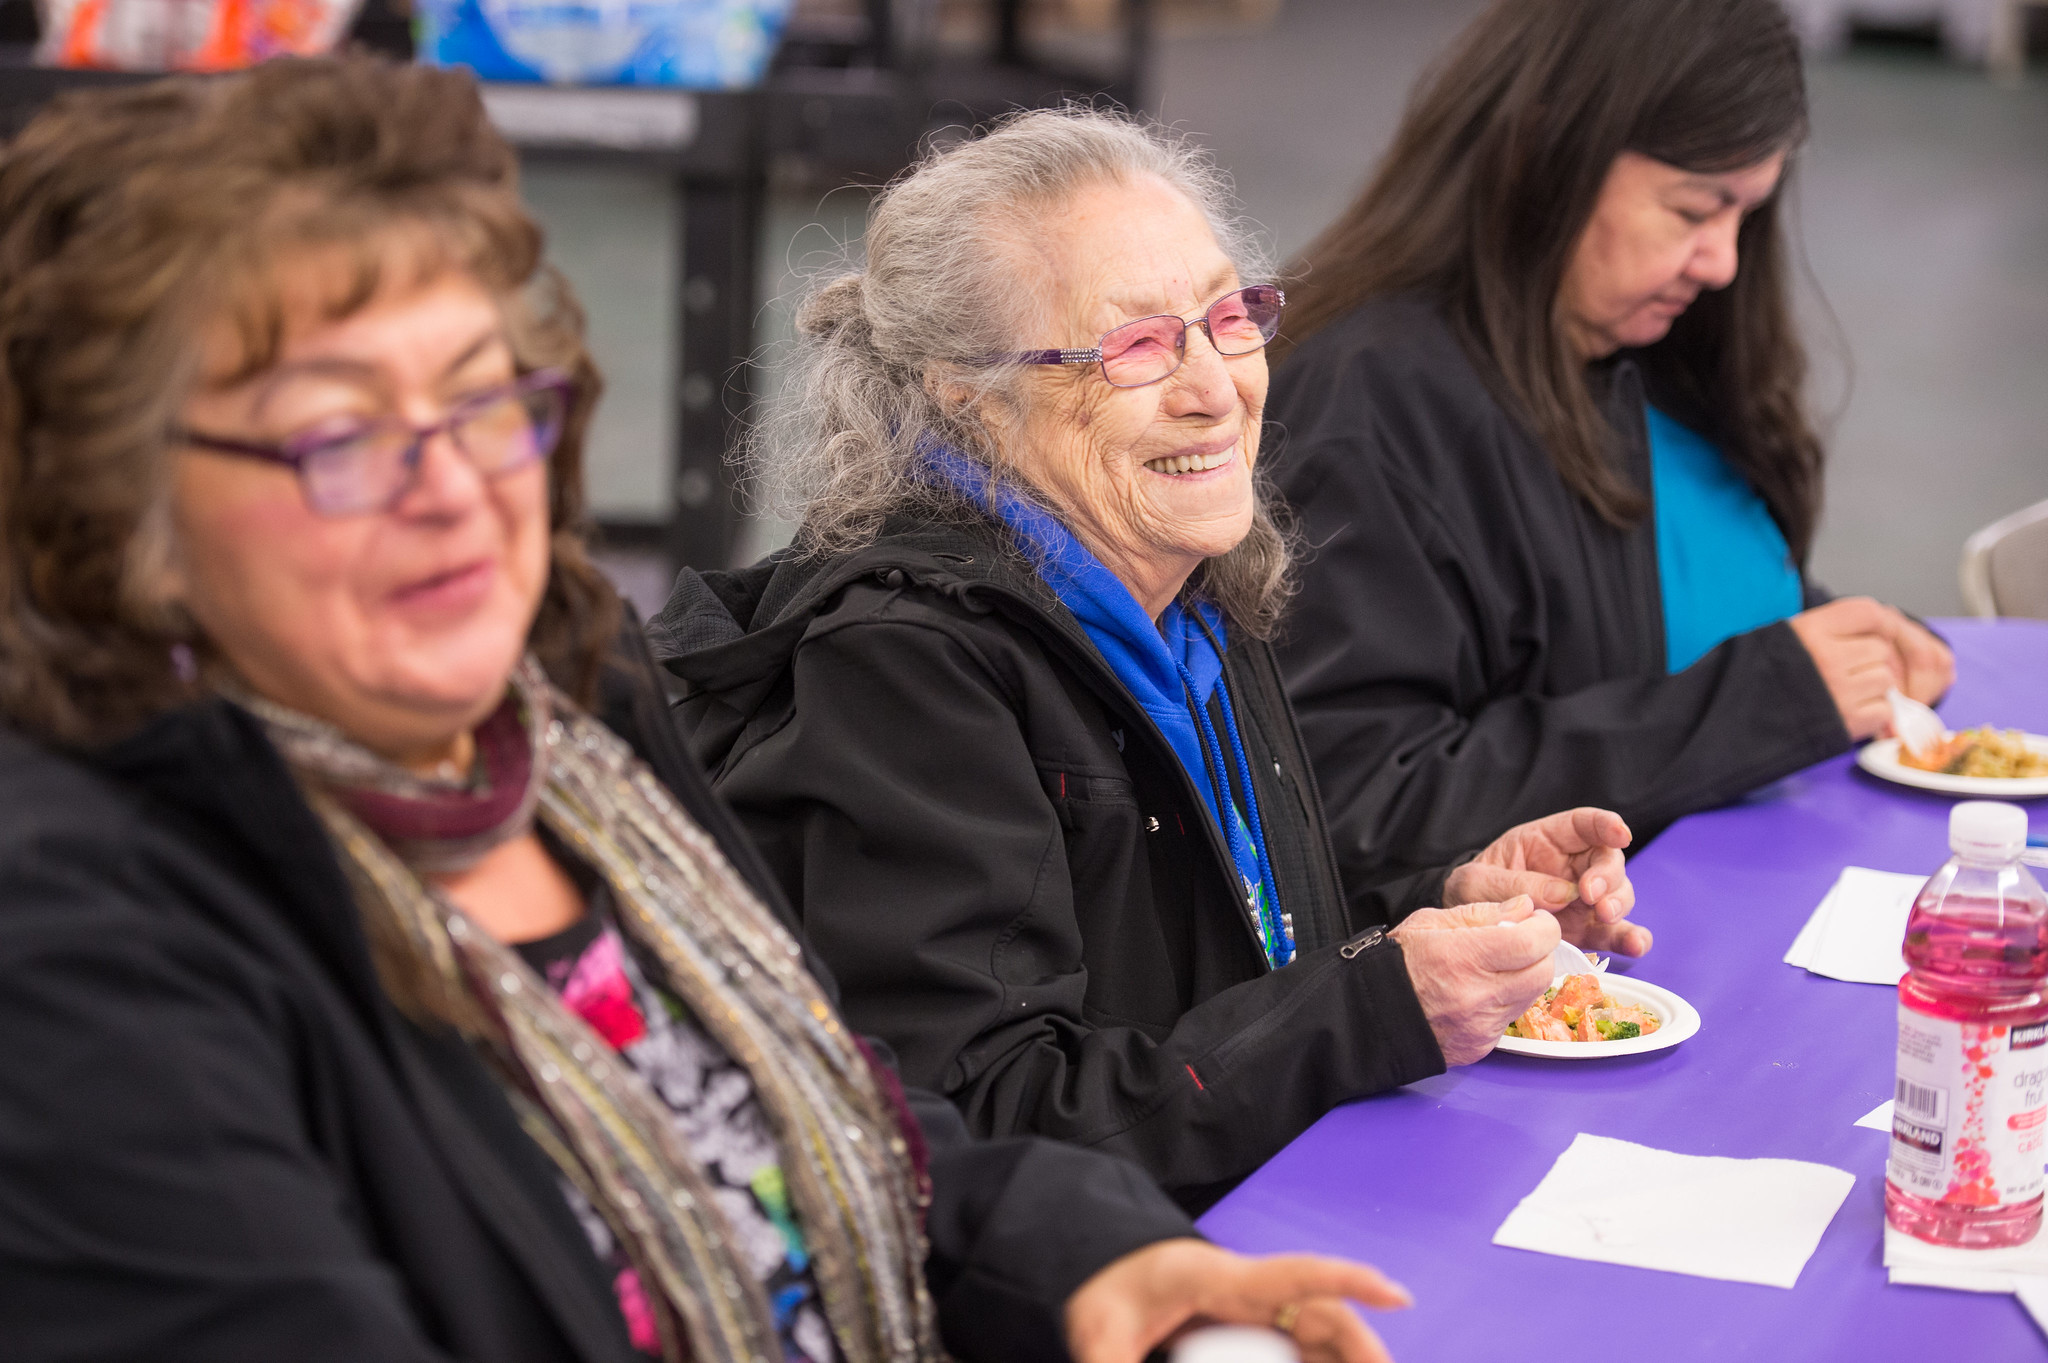 Three women from the Lummi Nation eat at a table.